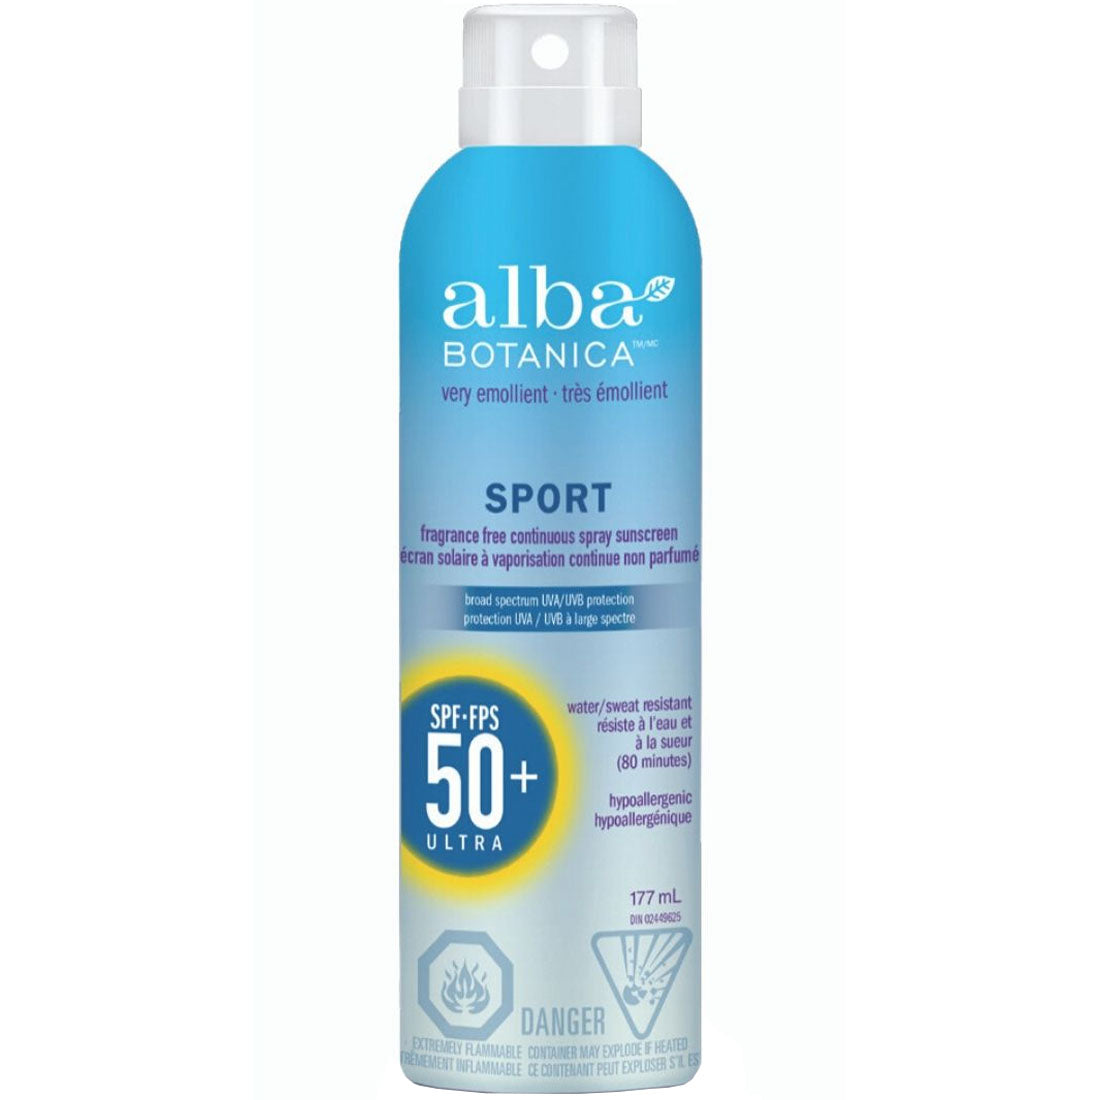 Alba Botanica Sport Fragrance Free Continuous Spray Sunscreen, Water Resistant (SPF 50), 177ml